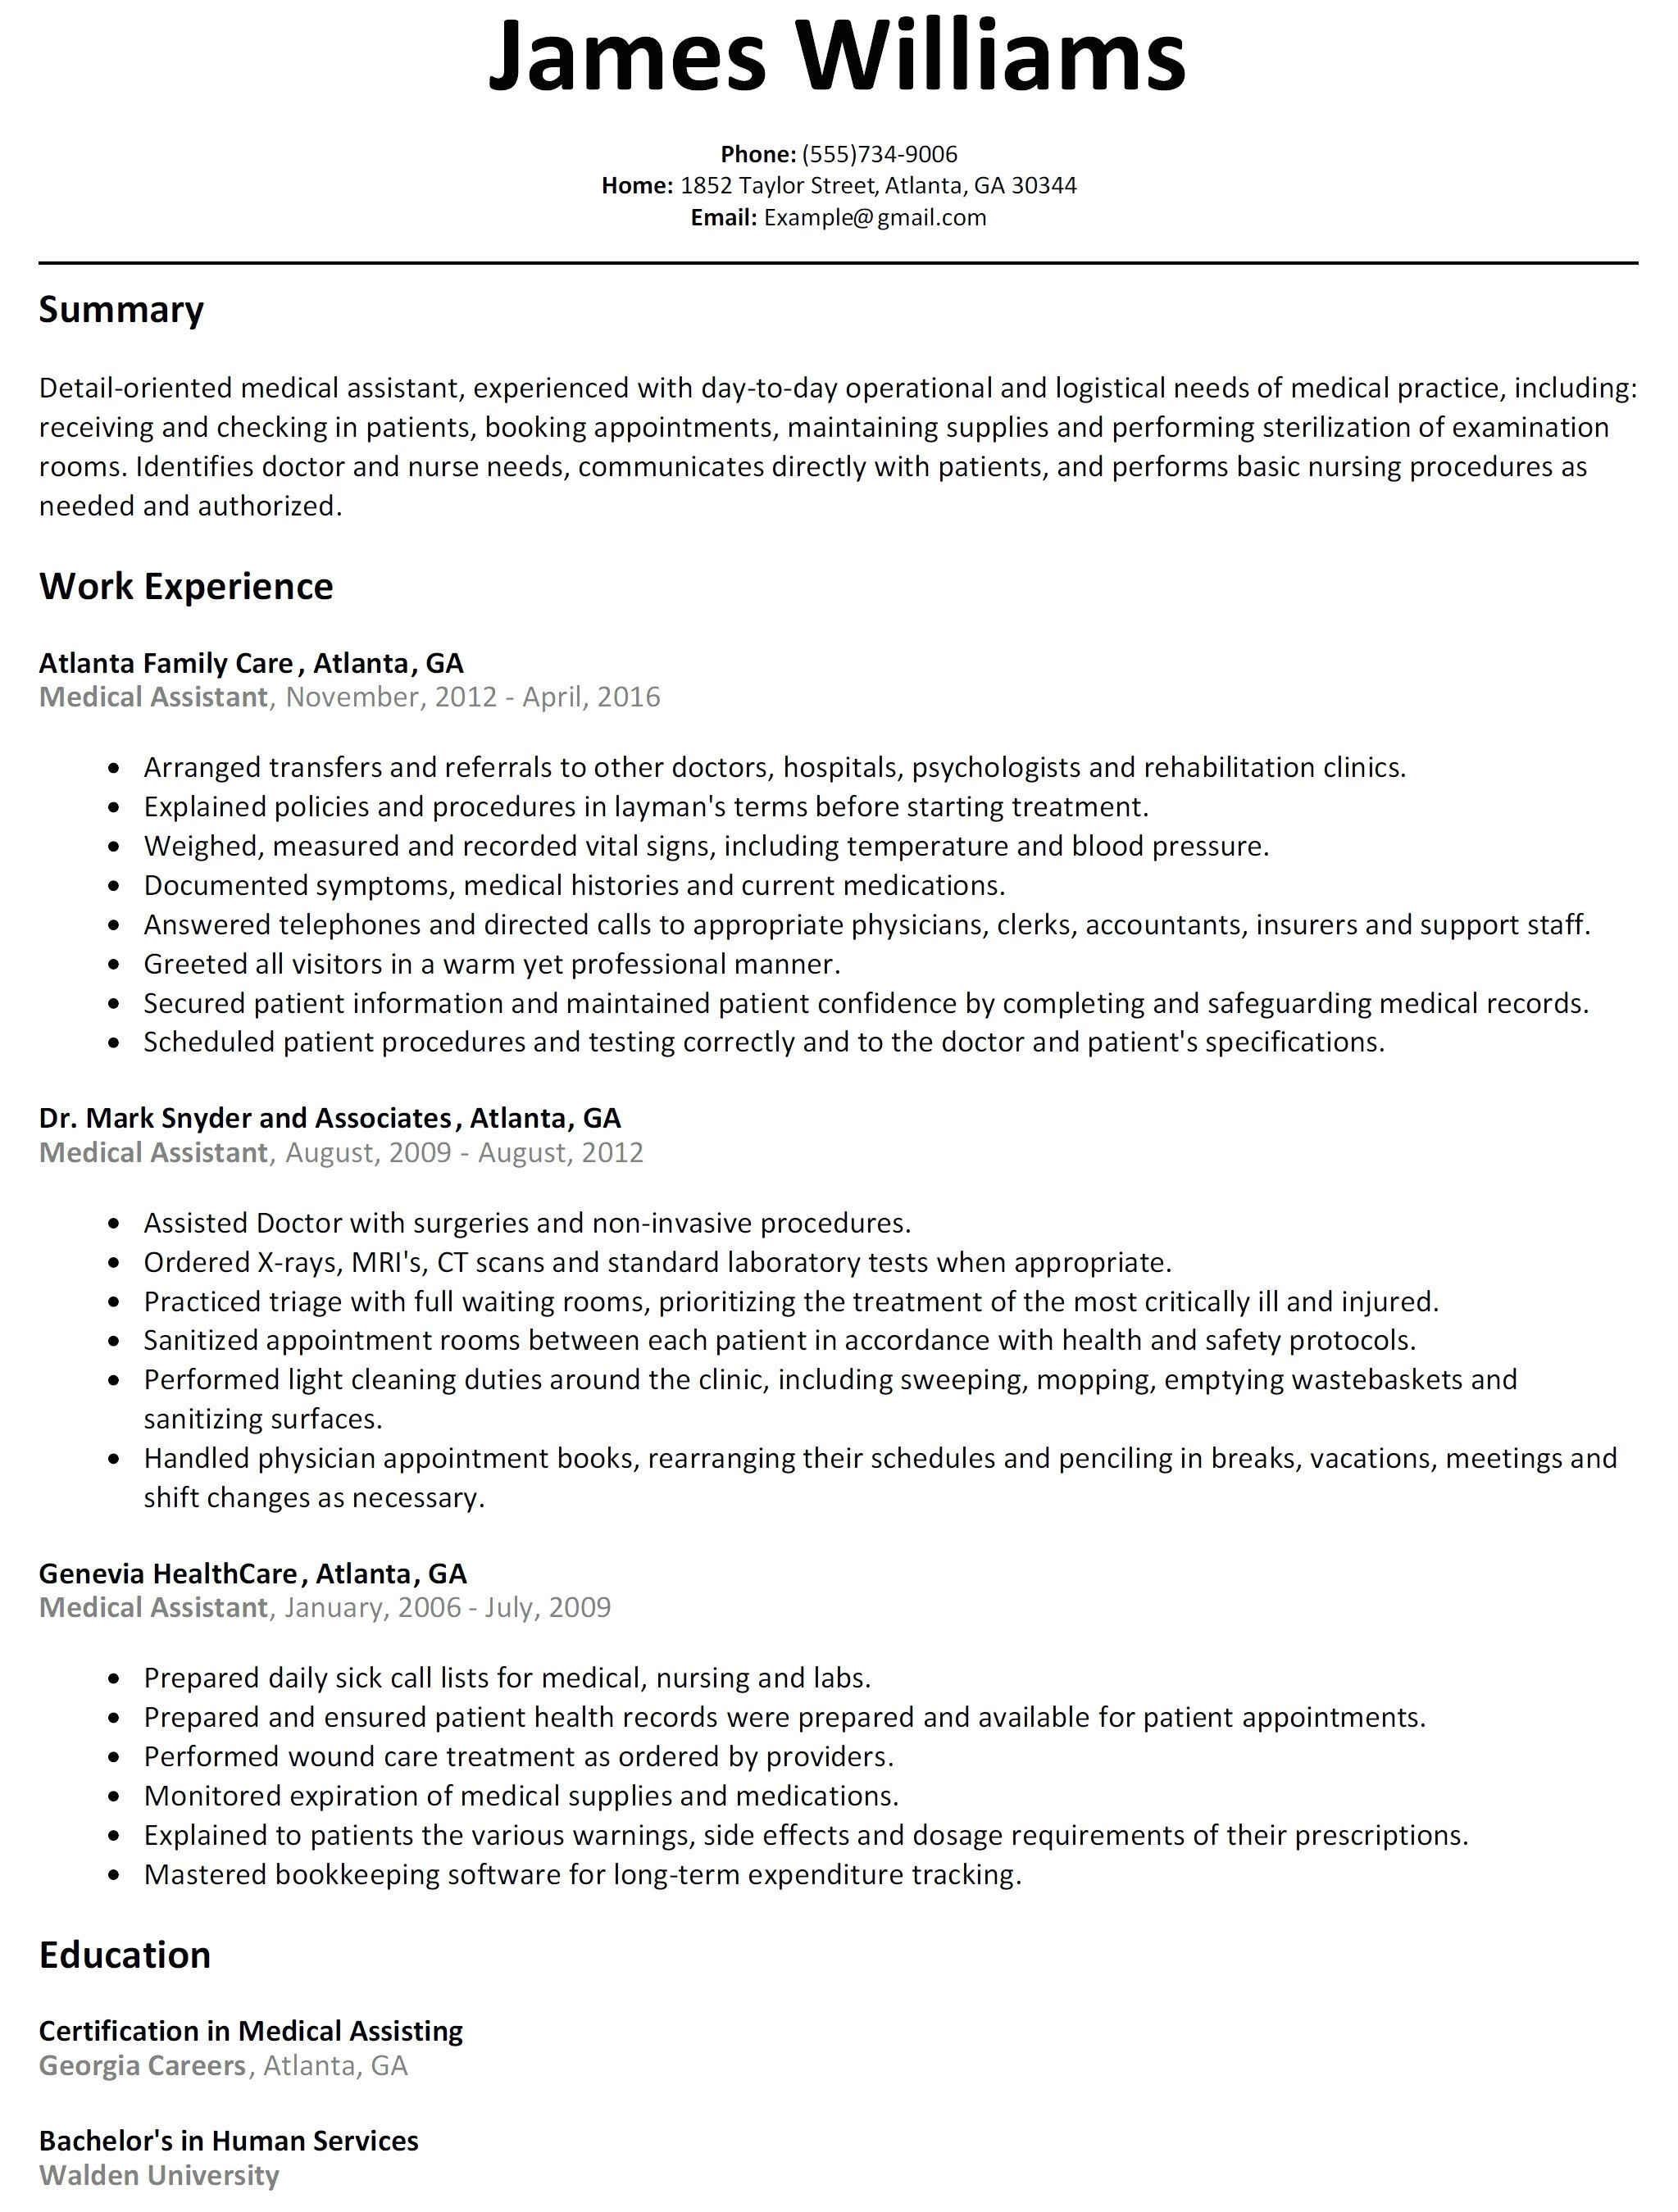 sample resume for project manager